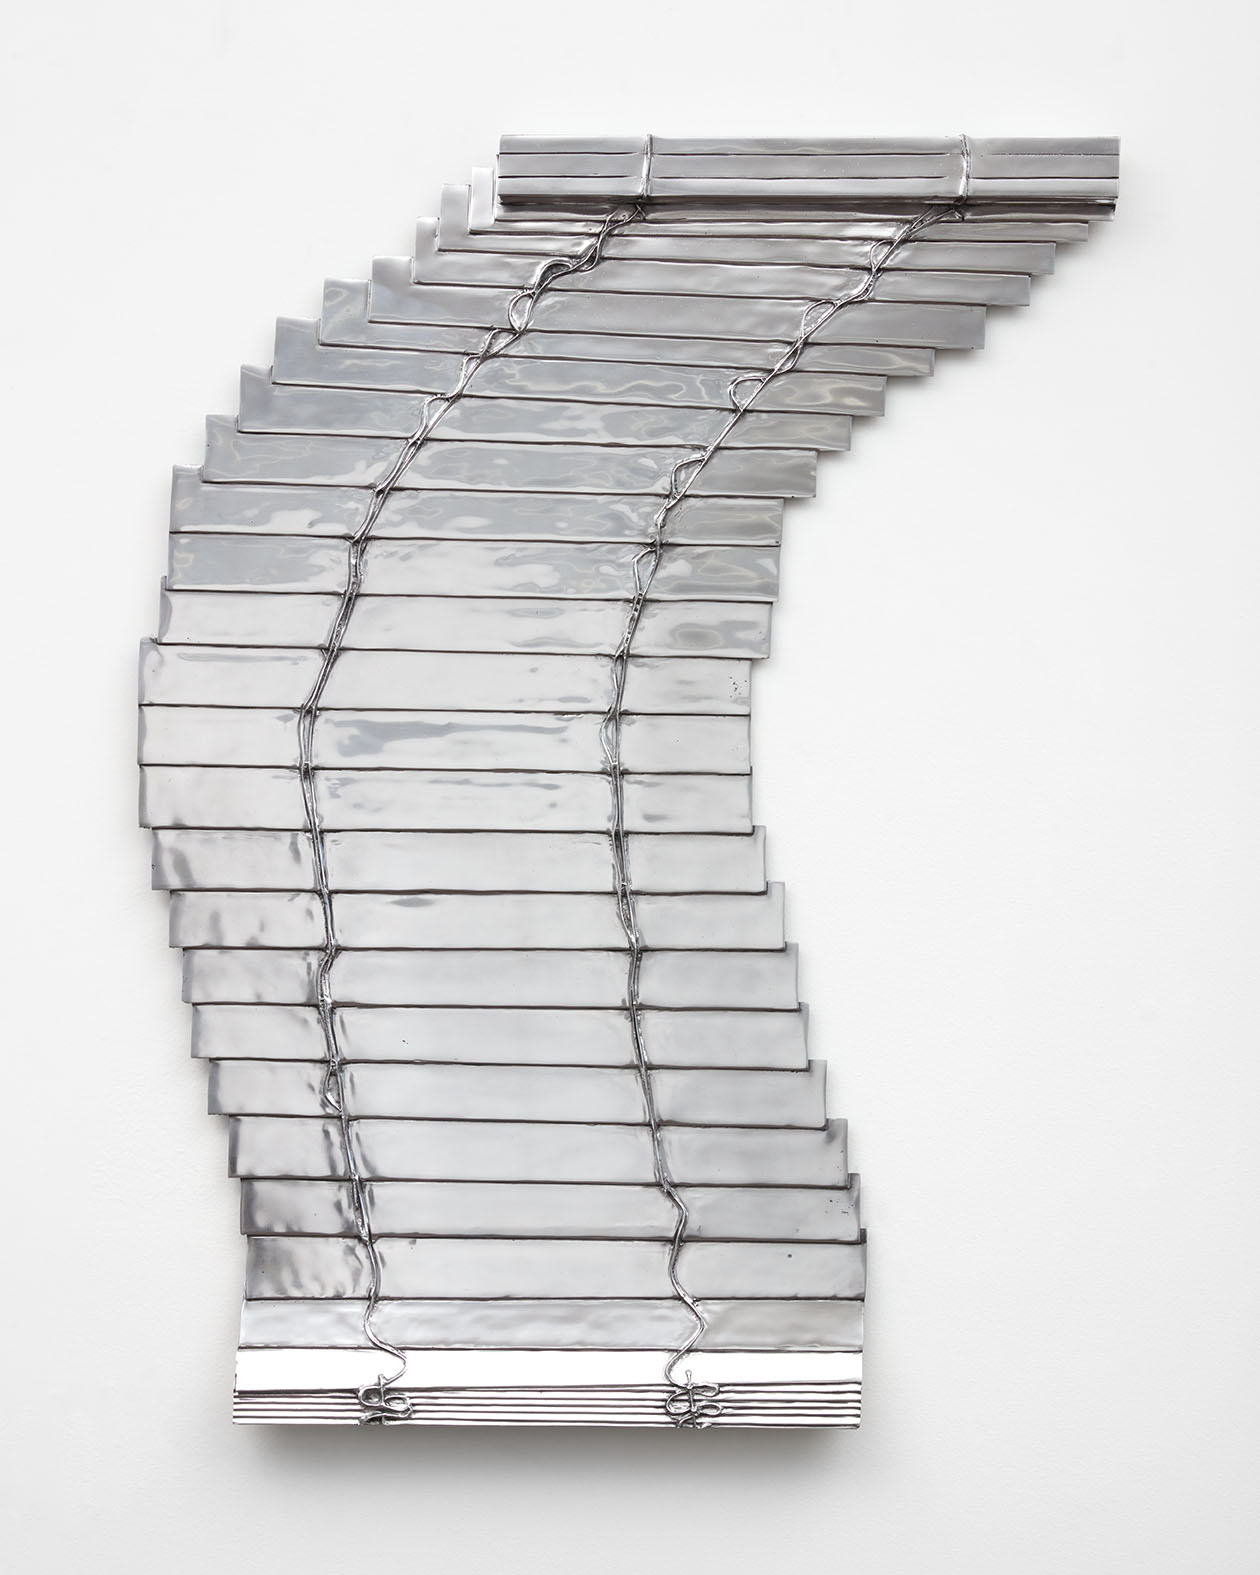 Anne Libby, These Days, 70, 2021, Polished cast aluminum, 46h x 36w in.